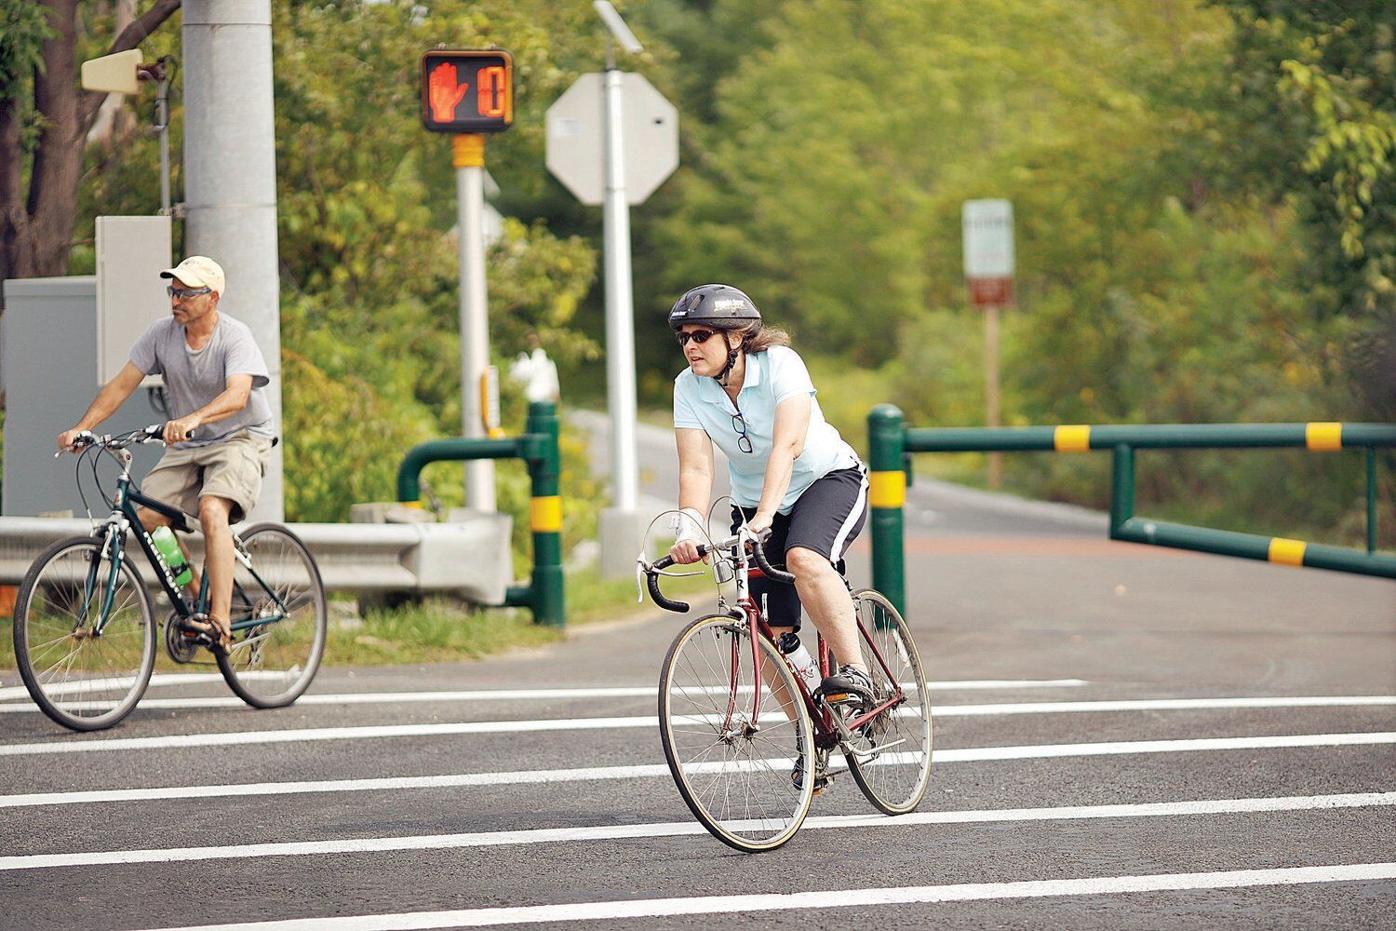 On the path to safer, more frequent bicycling